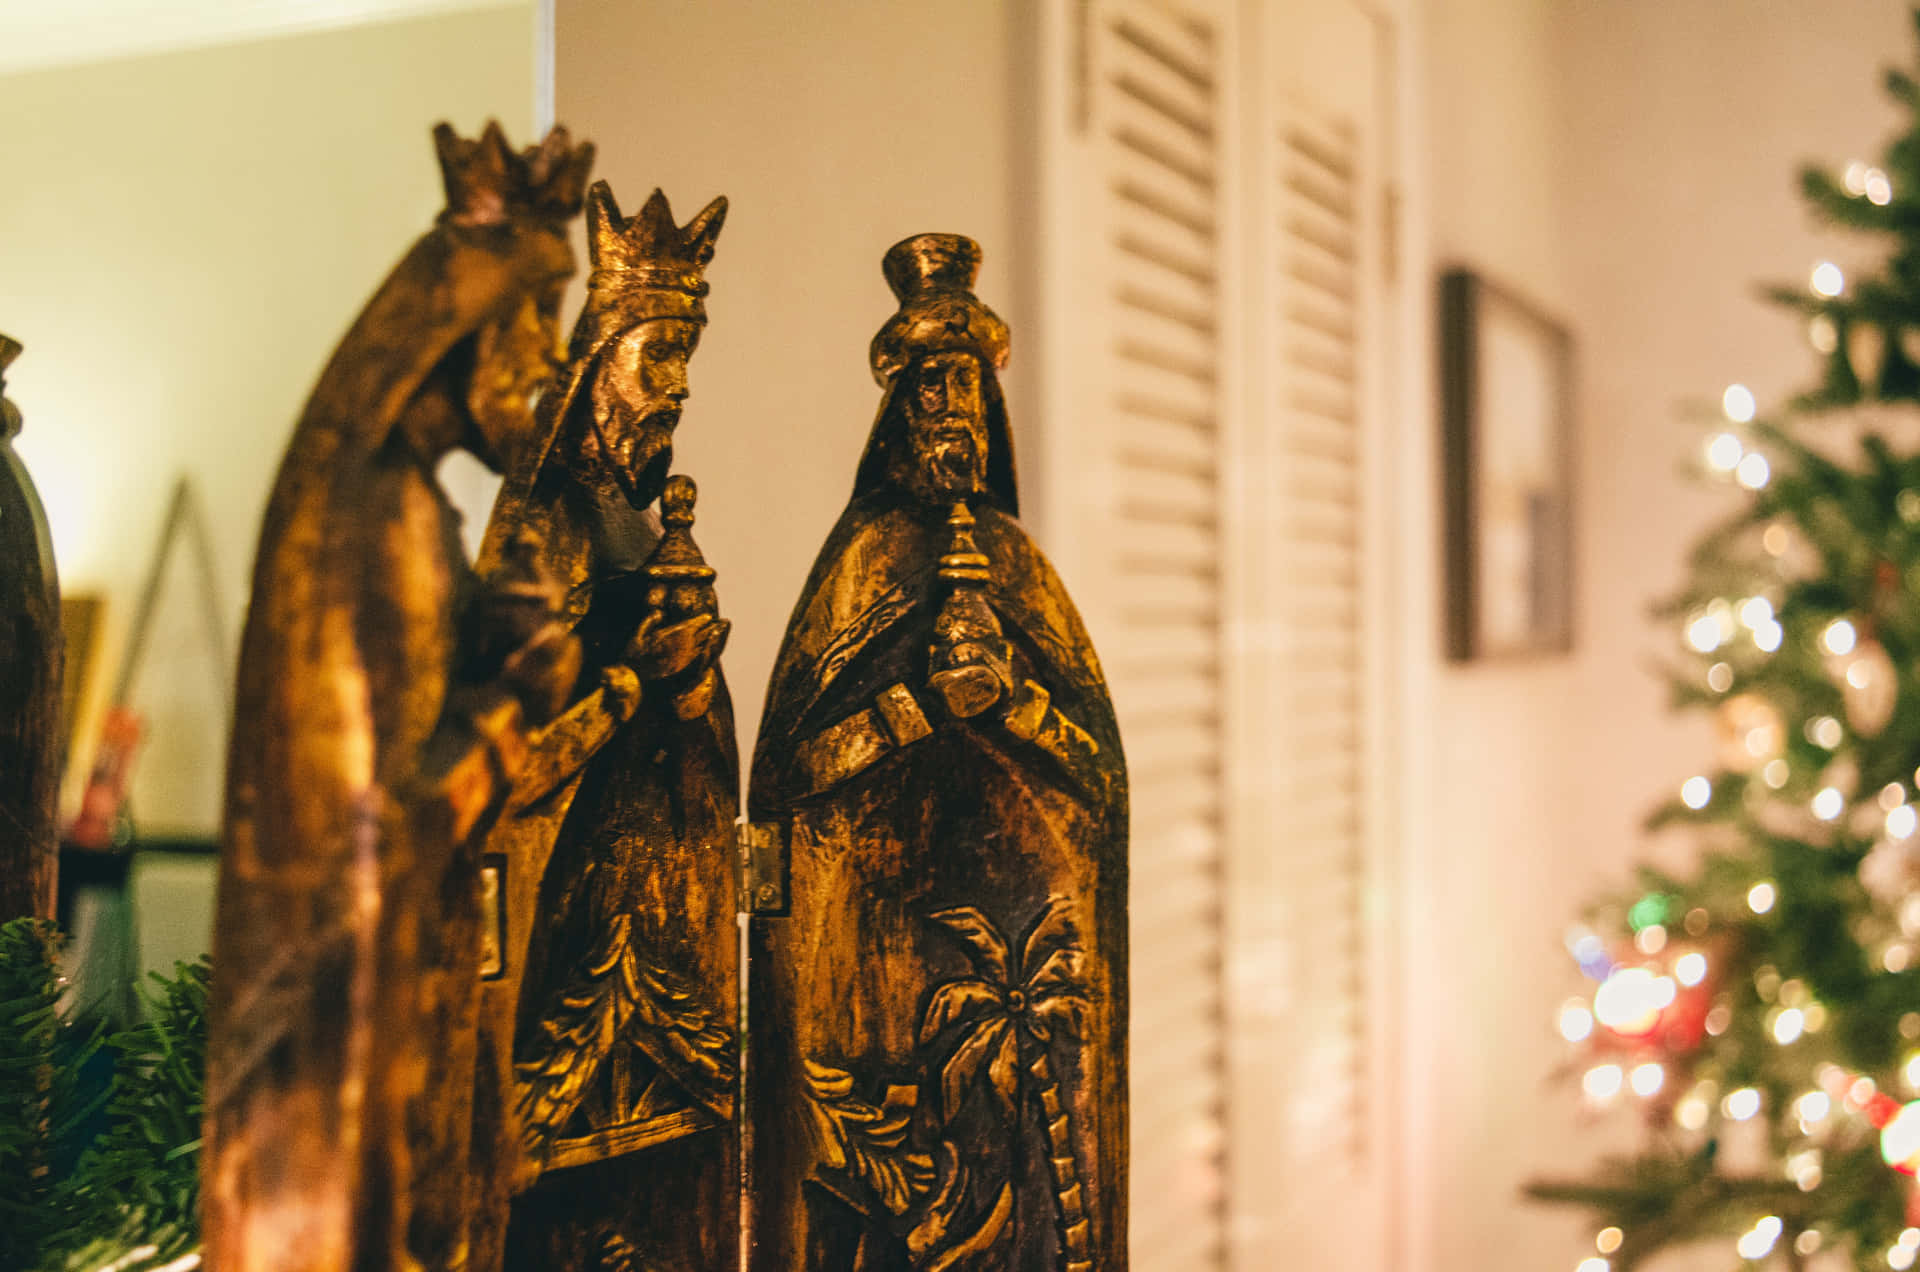 A Wooden Statue Of The Nativity In Front Of A Christmas Tree